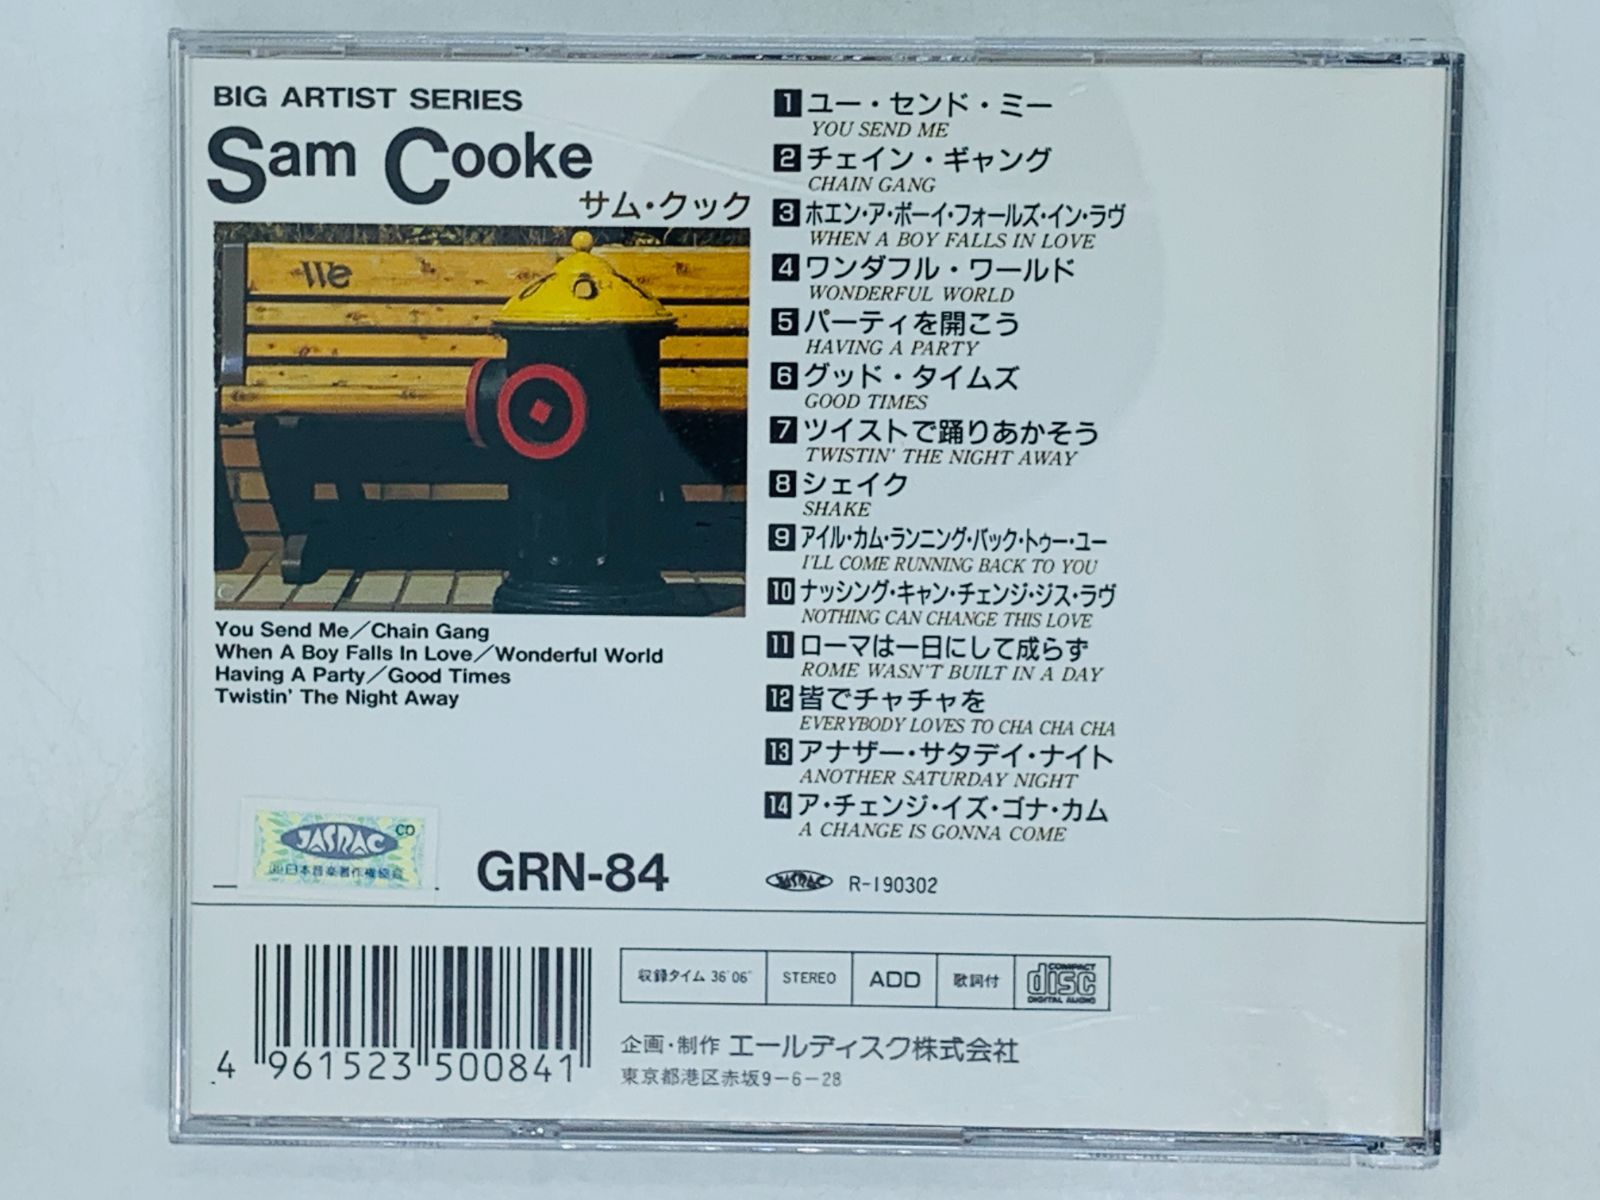 SAM　TOTAL　COLLECTION　14曲収録　サム・クック　SAMCOOKE　Y31　SPECIAL　SHOP　メルカリ　CD　アルバム　COOKE　CD